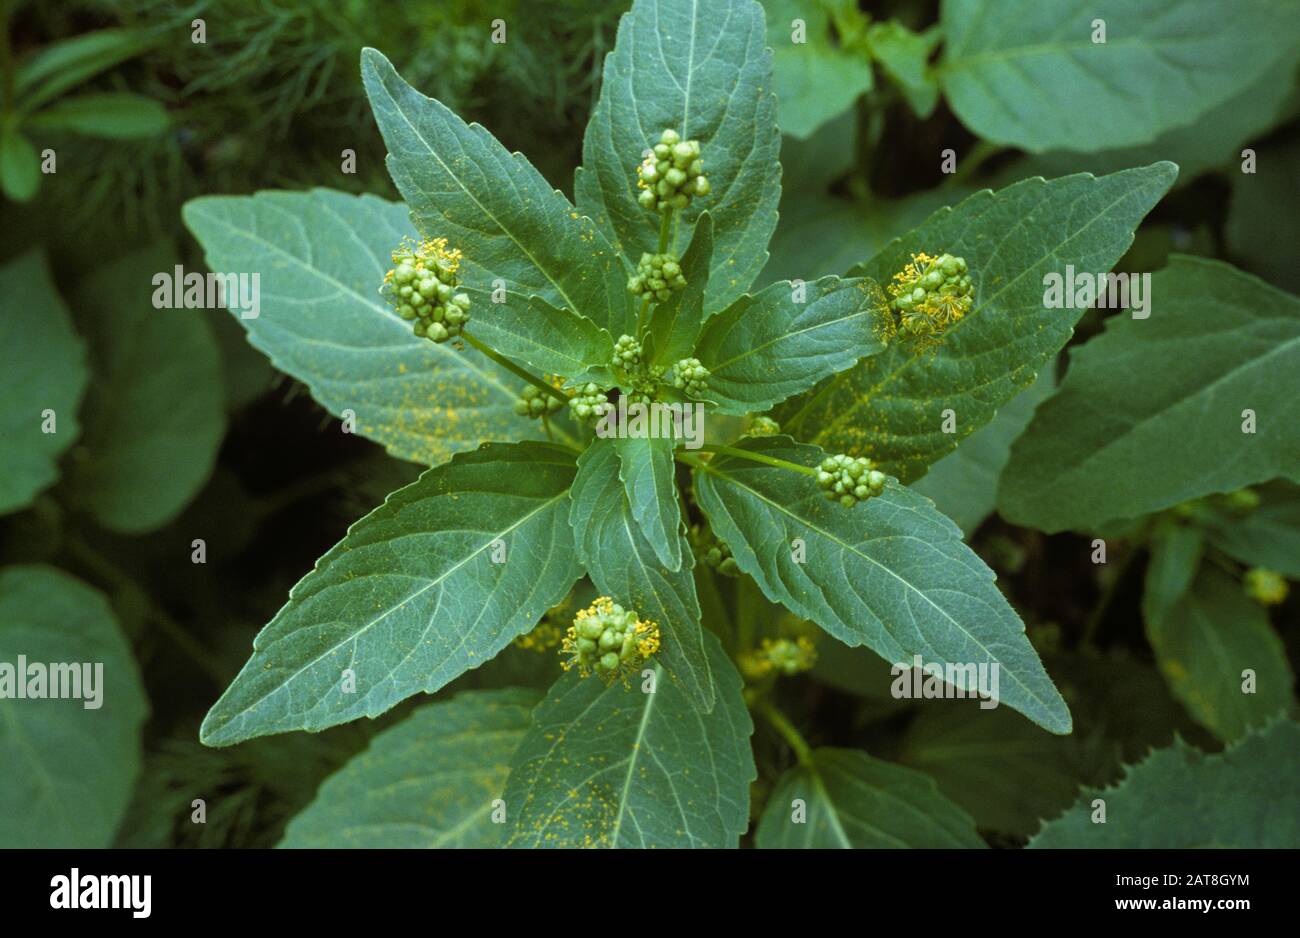 Annual mercury (Mercurialis annua) flowering weed and leaves, Stock Photo